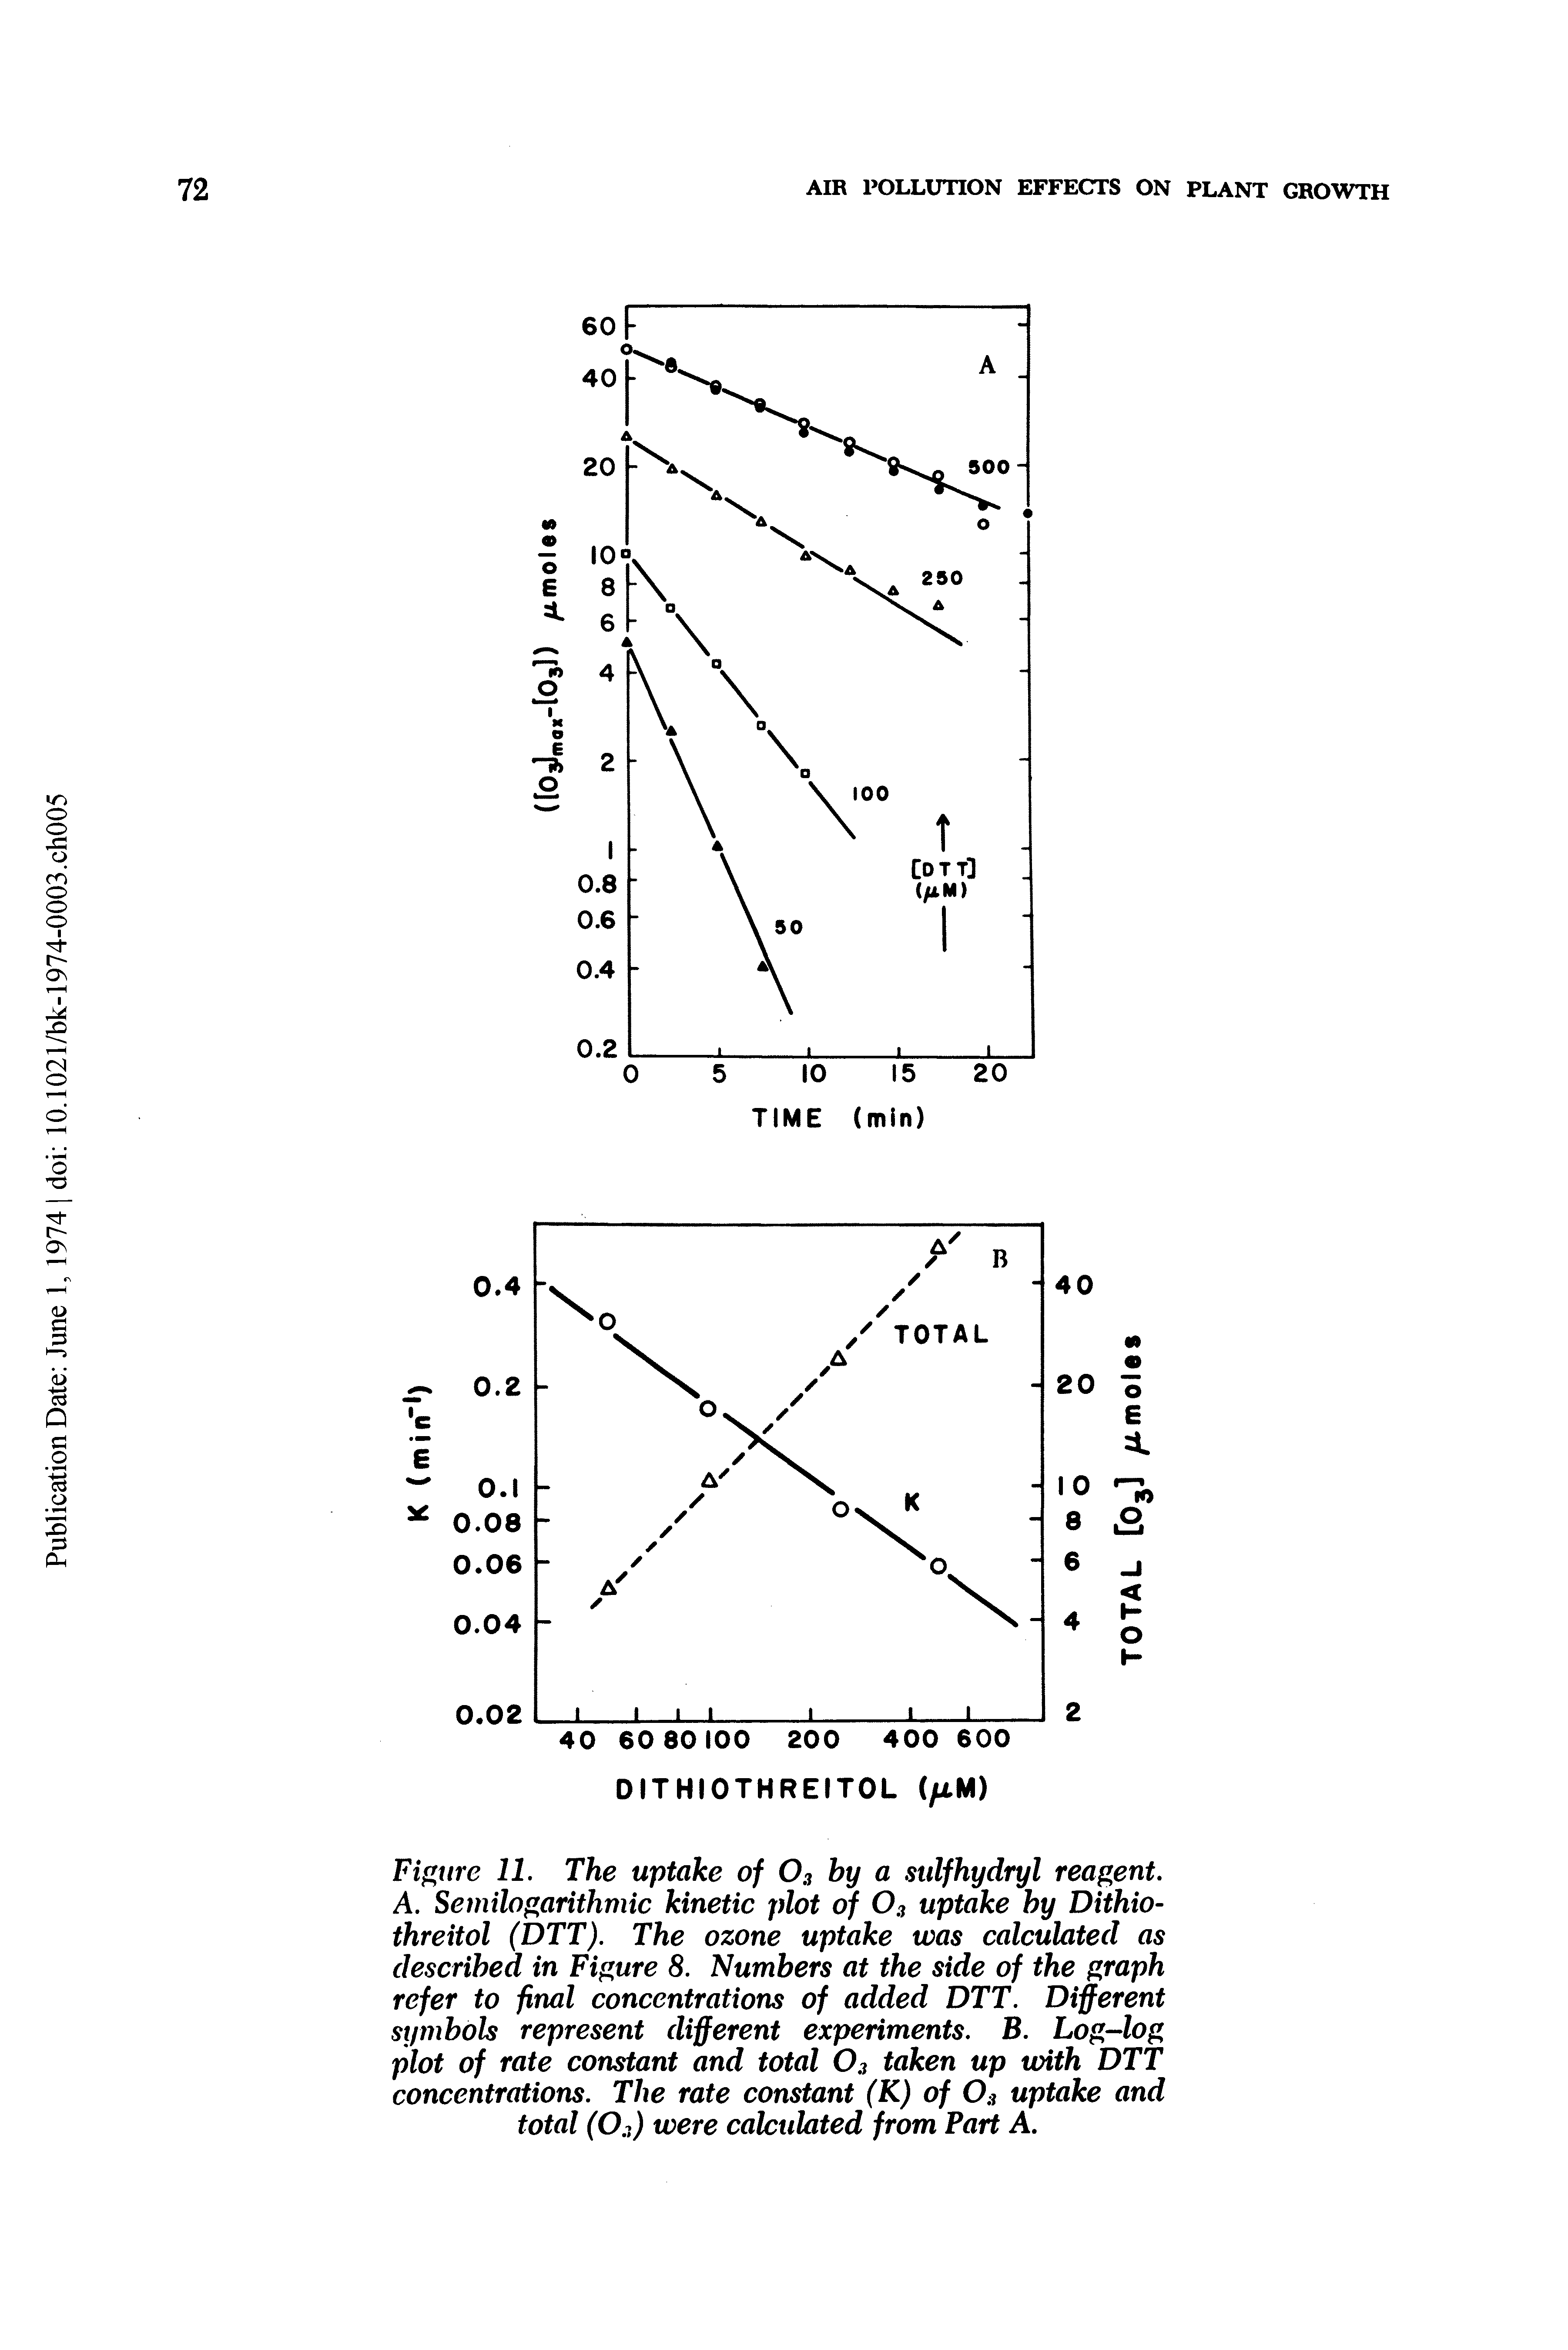 Figure 11. The uptake of O3 by a. sulfhydryl reagent. A. Semilogarithmic kinetic plot of O3 uptake by Dithio-threitol (DTT). The ozone uptake was calculated as described in Figure 8. Numbers at the side of the graph refer to final concentrations of added DTT. Different symbols represent different experiments. B. Log-dog plot of rate constant and total O3 taken up with DTT concentrations. The rate constant (K) of O3 uptake and total (O3) were calculated from Part A.